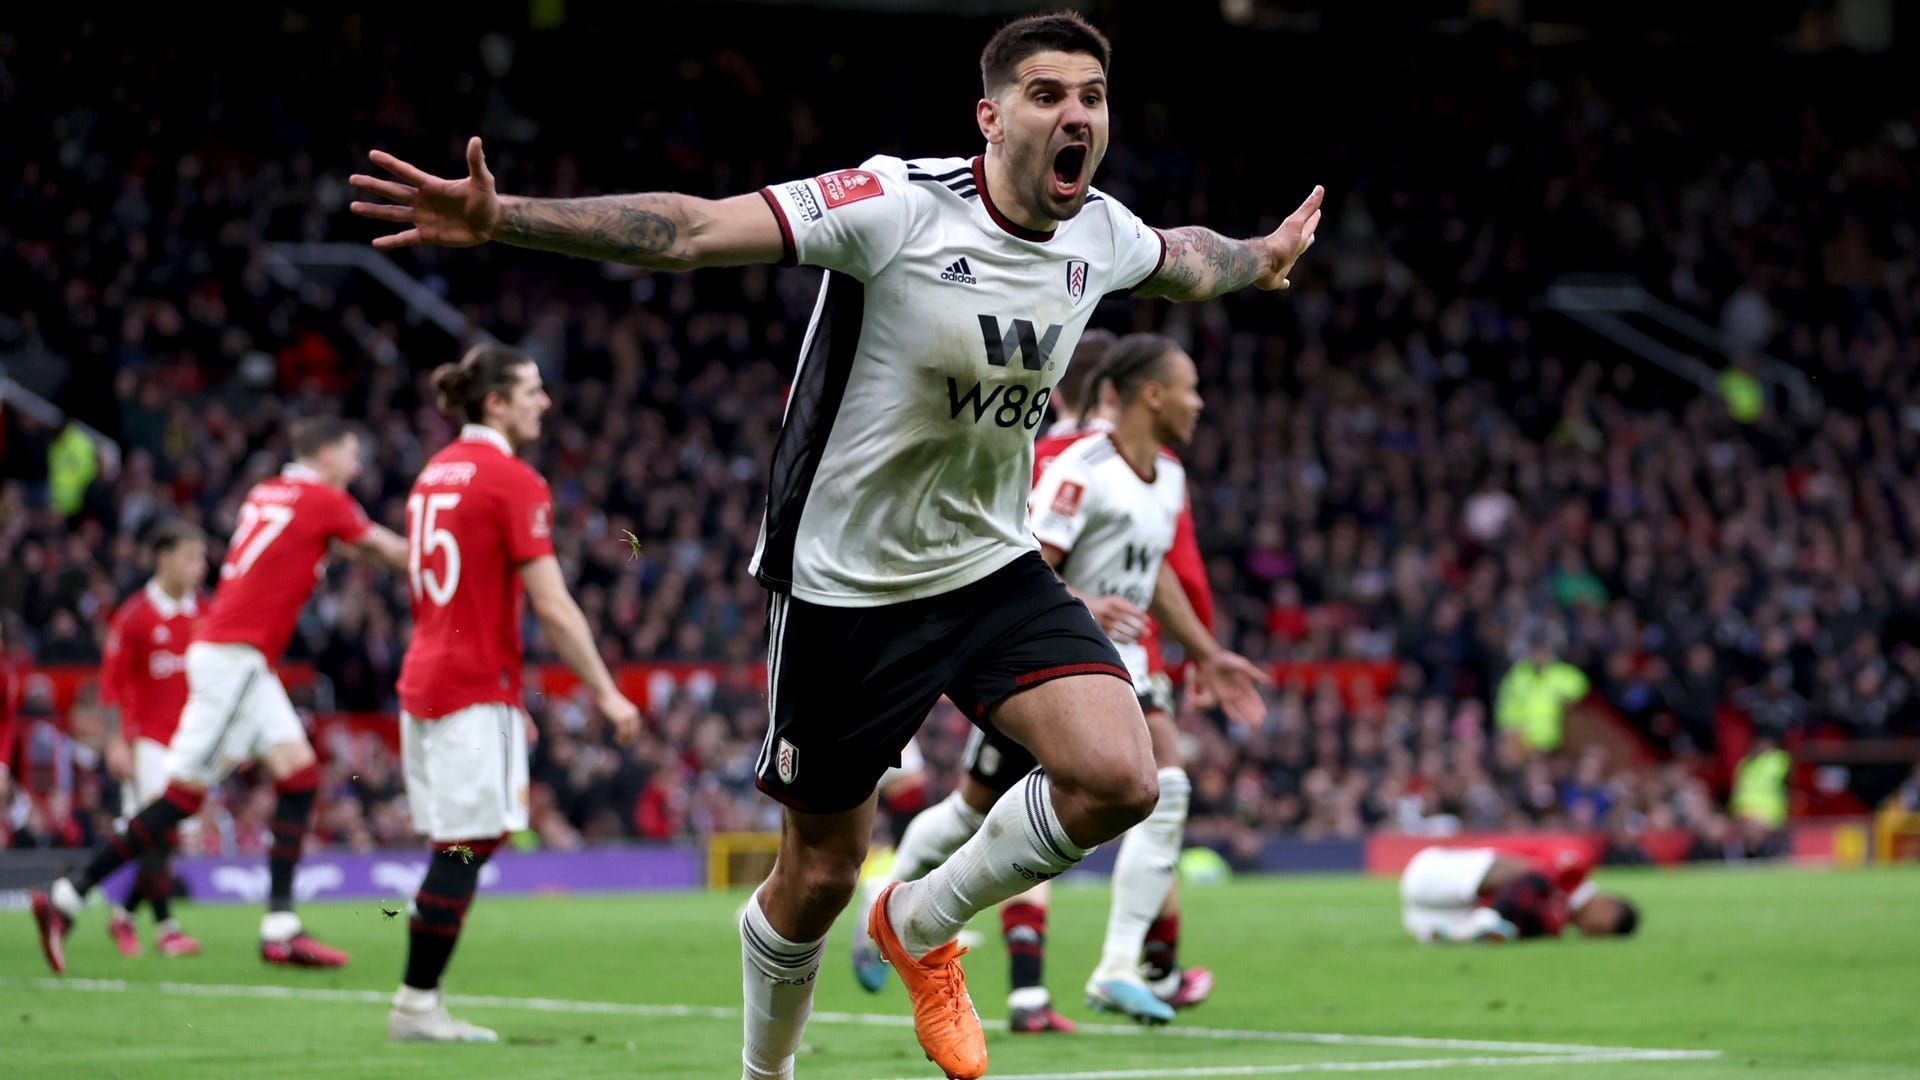 Bournemouth vs Fulham Where to watch the match online, live stream, TV channels and kick-off time Goal US